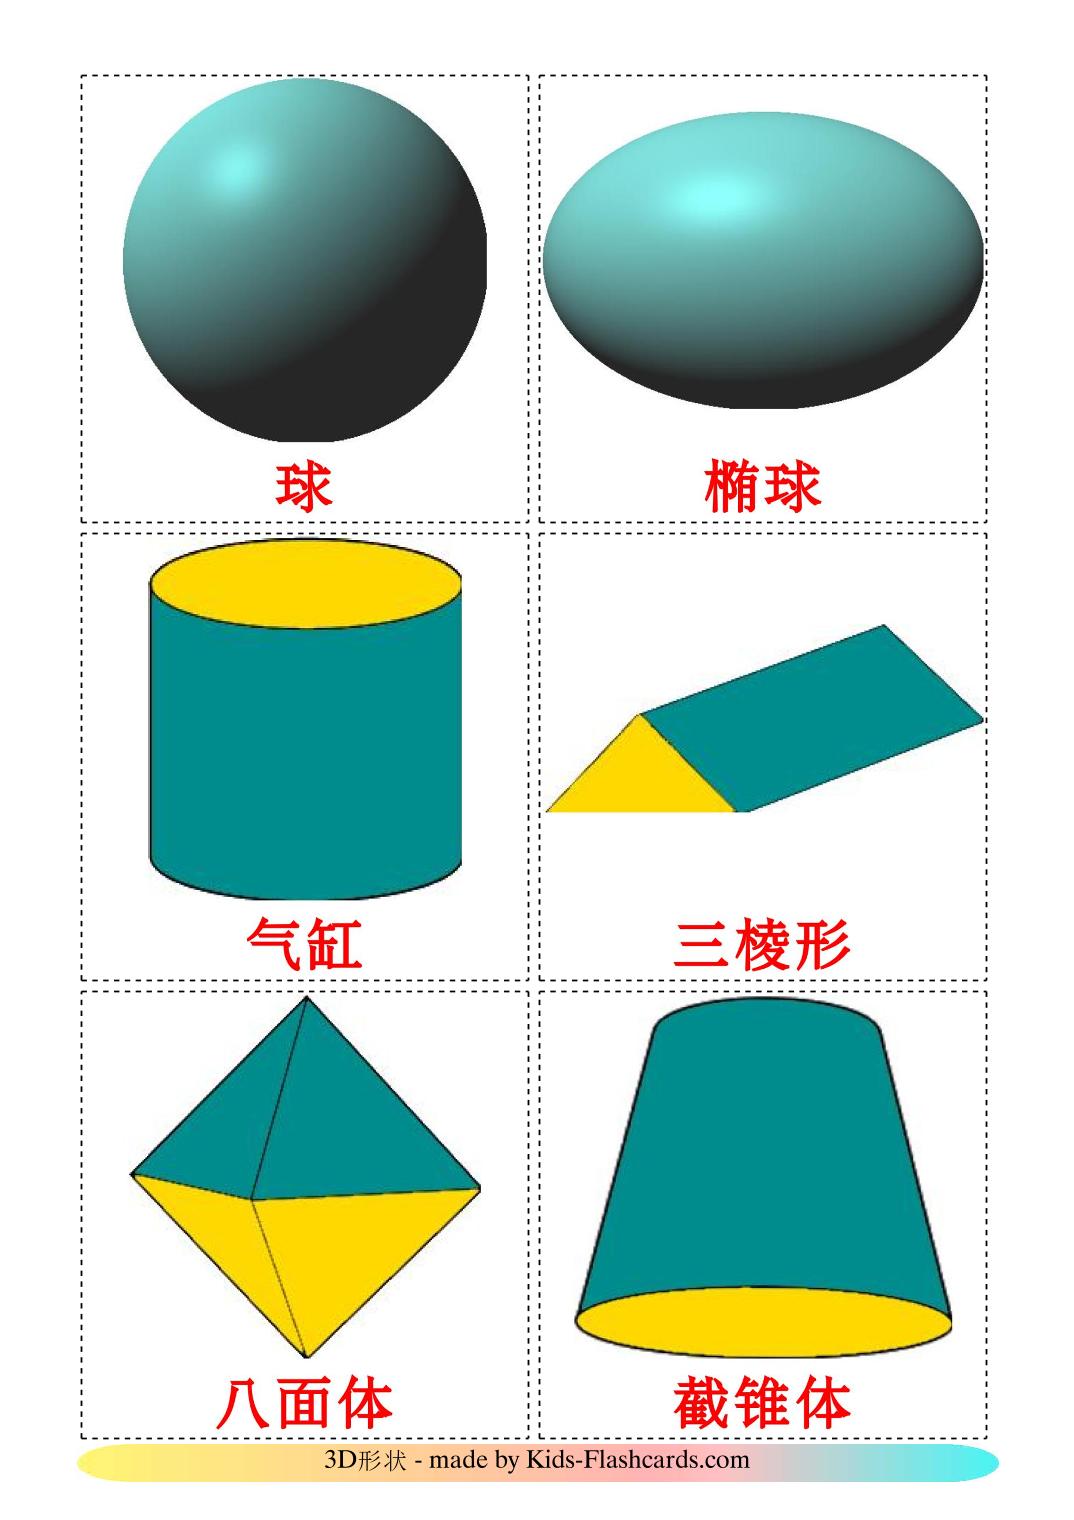 3D Shapes - 17 Free Printable chinese(Simplified) Flashcards 